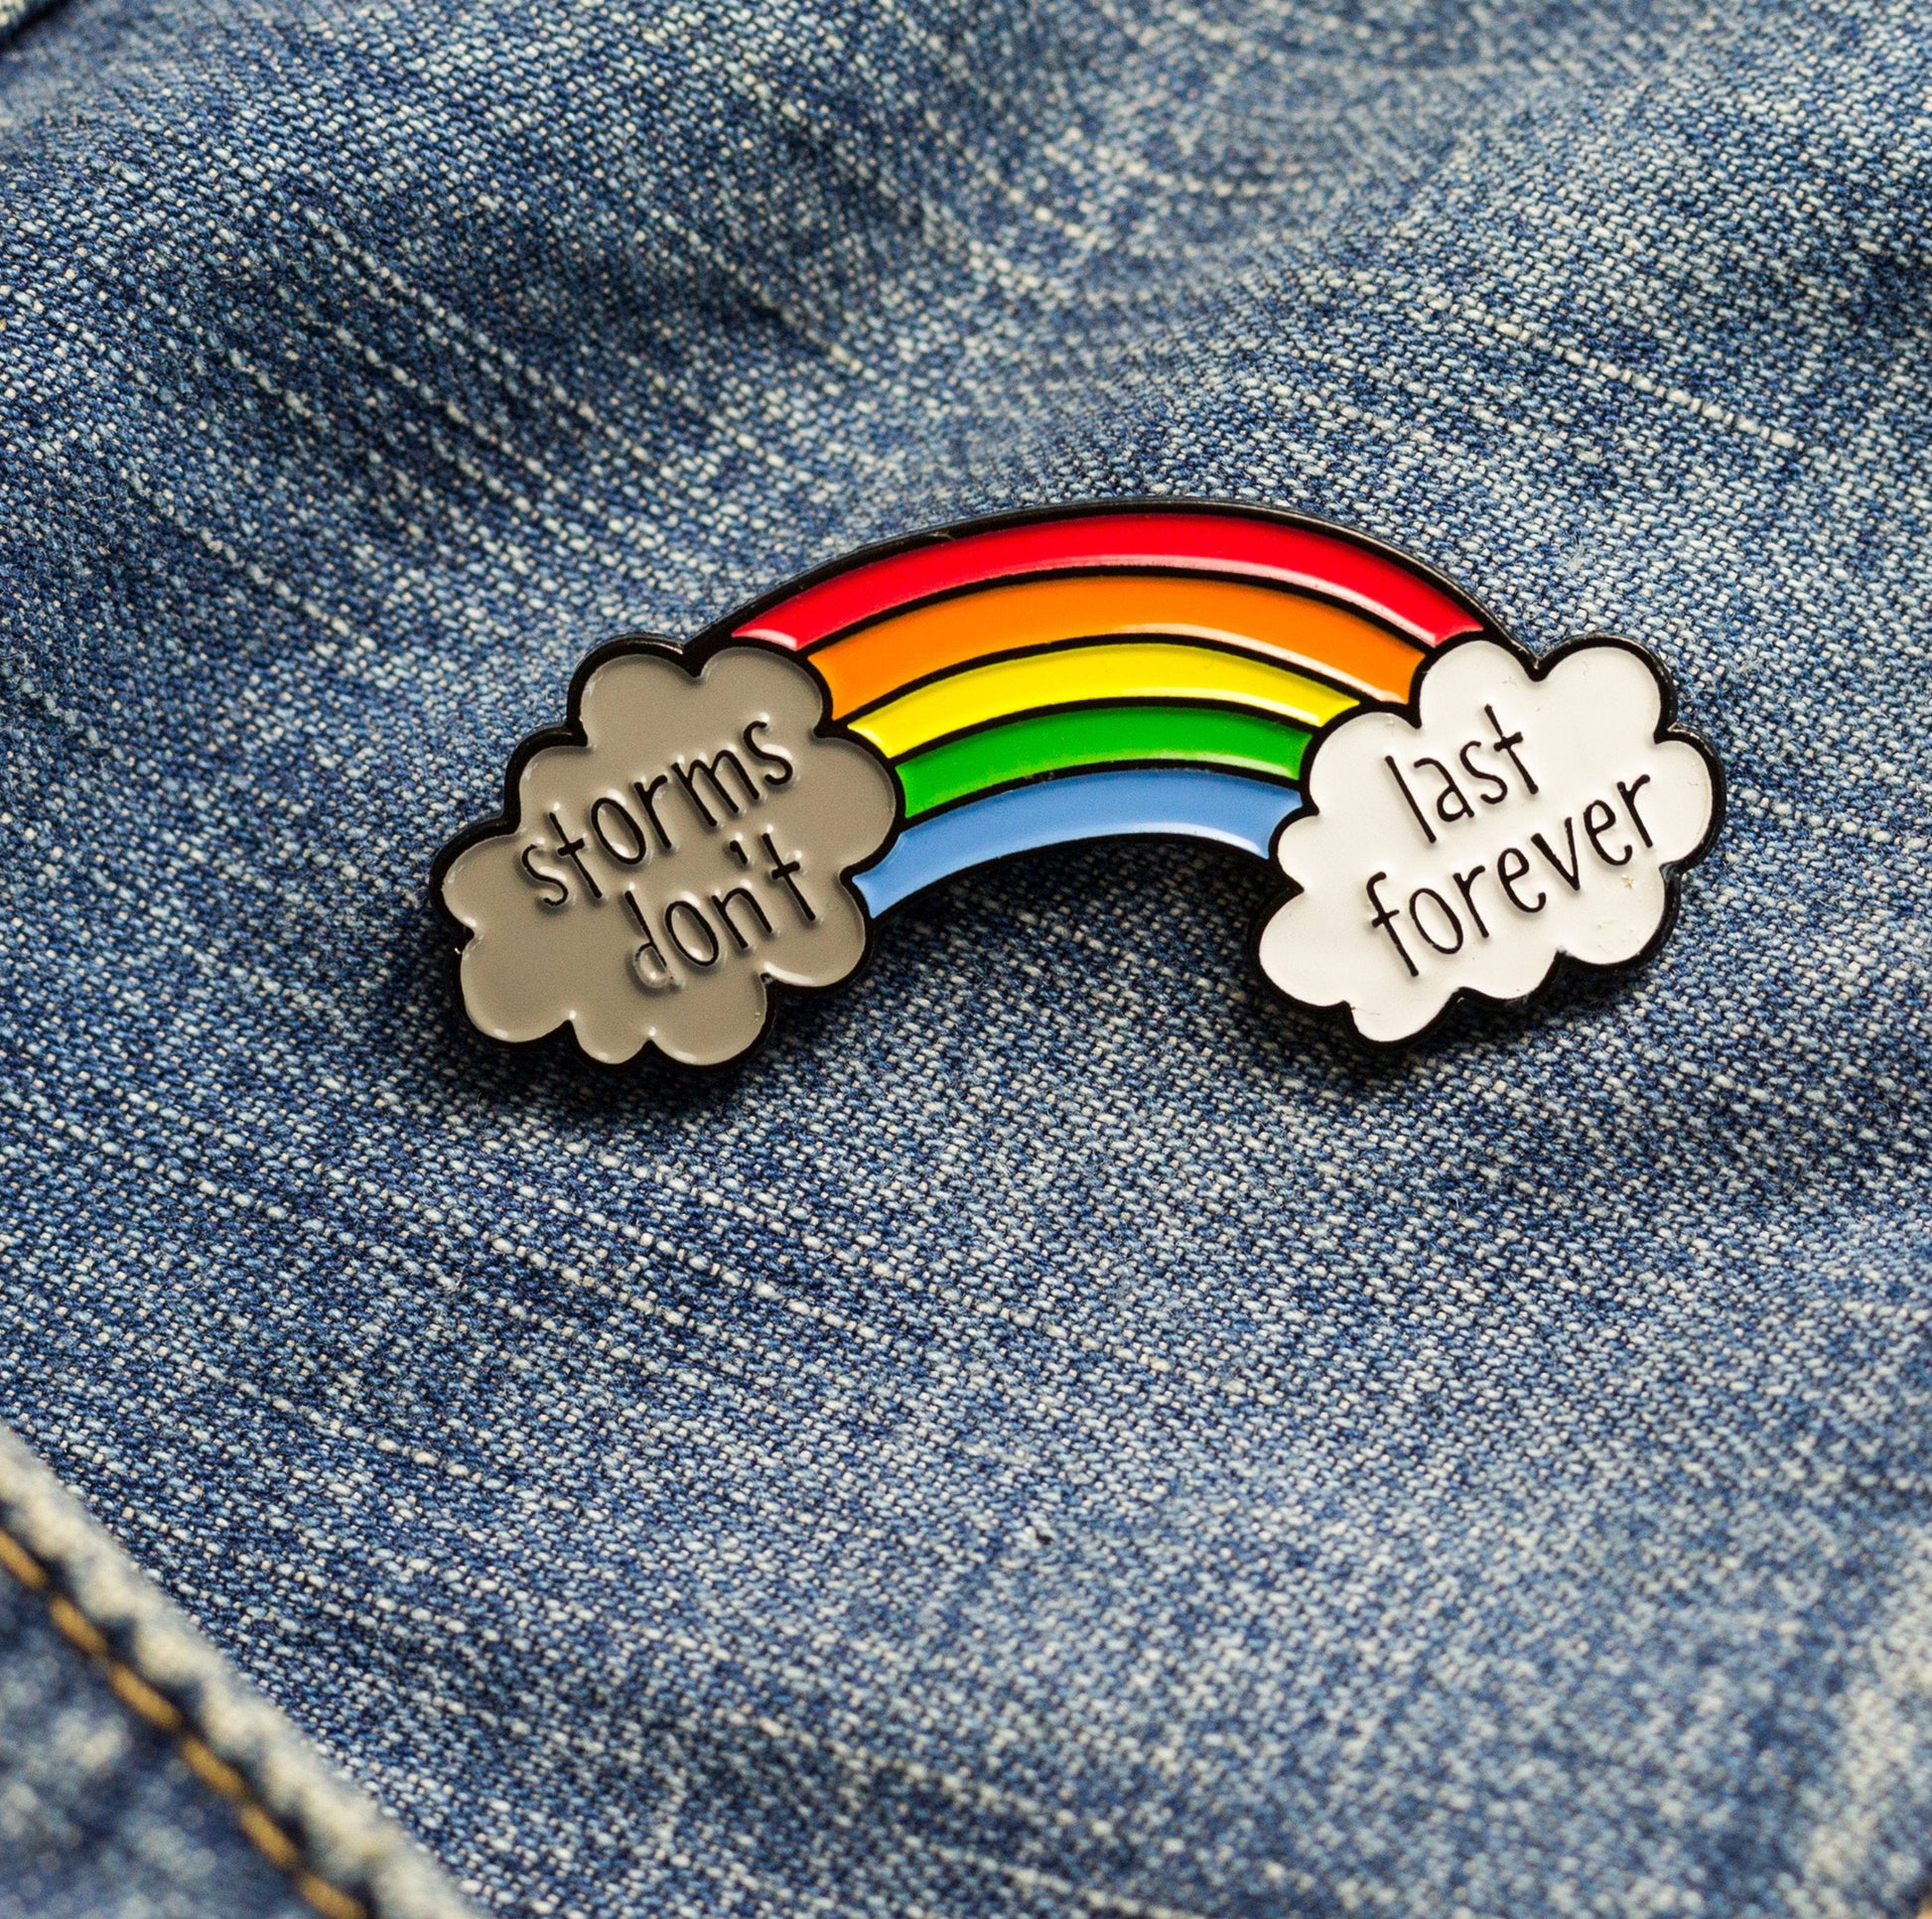 Storms Don't Last Forever Rainbow Pin - the-poppy-lane